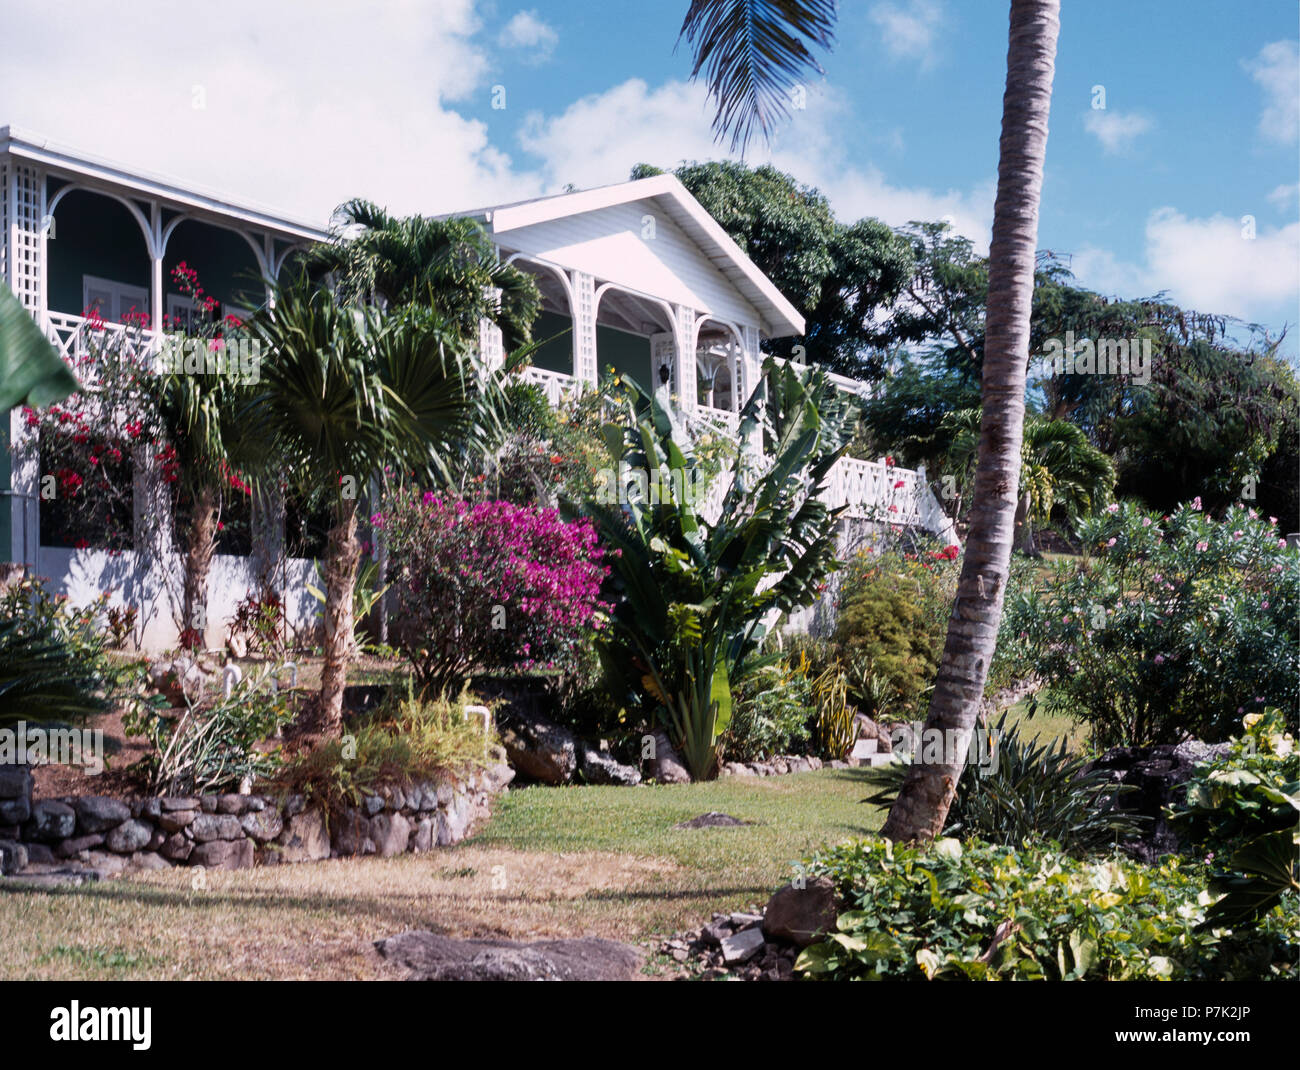 Palm trees and exotic shrubs in garden in front of traditional house in the West Indies Stock Photo